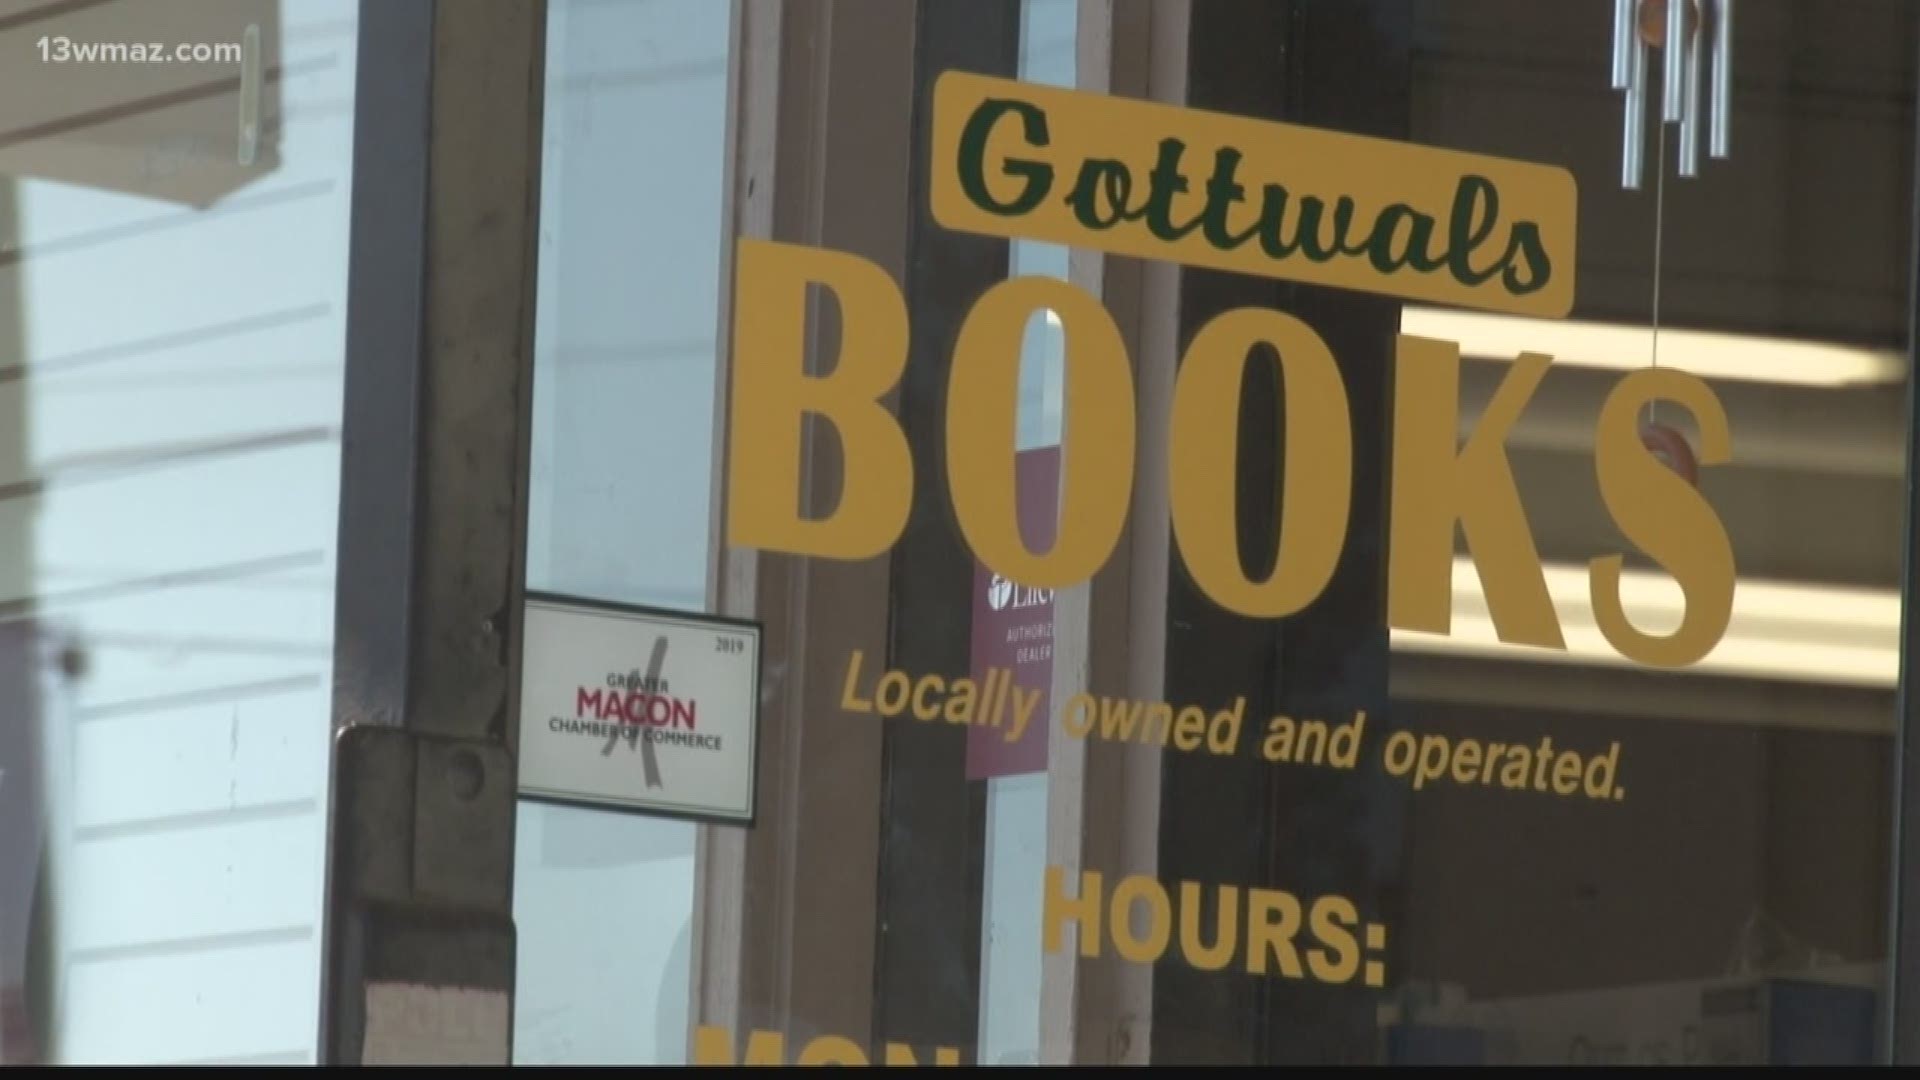 Gottwals Books is partnering up with Robins Regional Chamber to create a free drive-thru book giveaway.